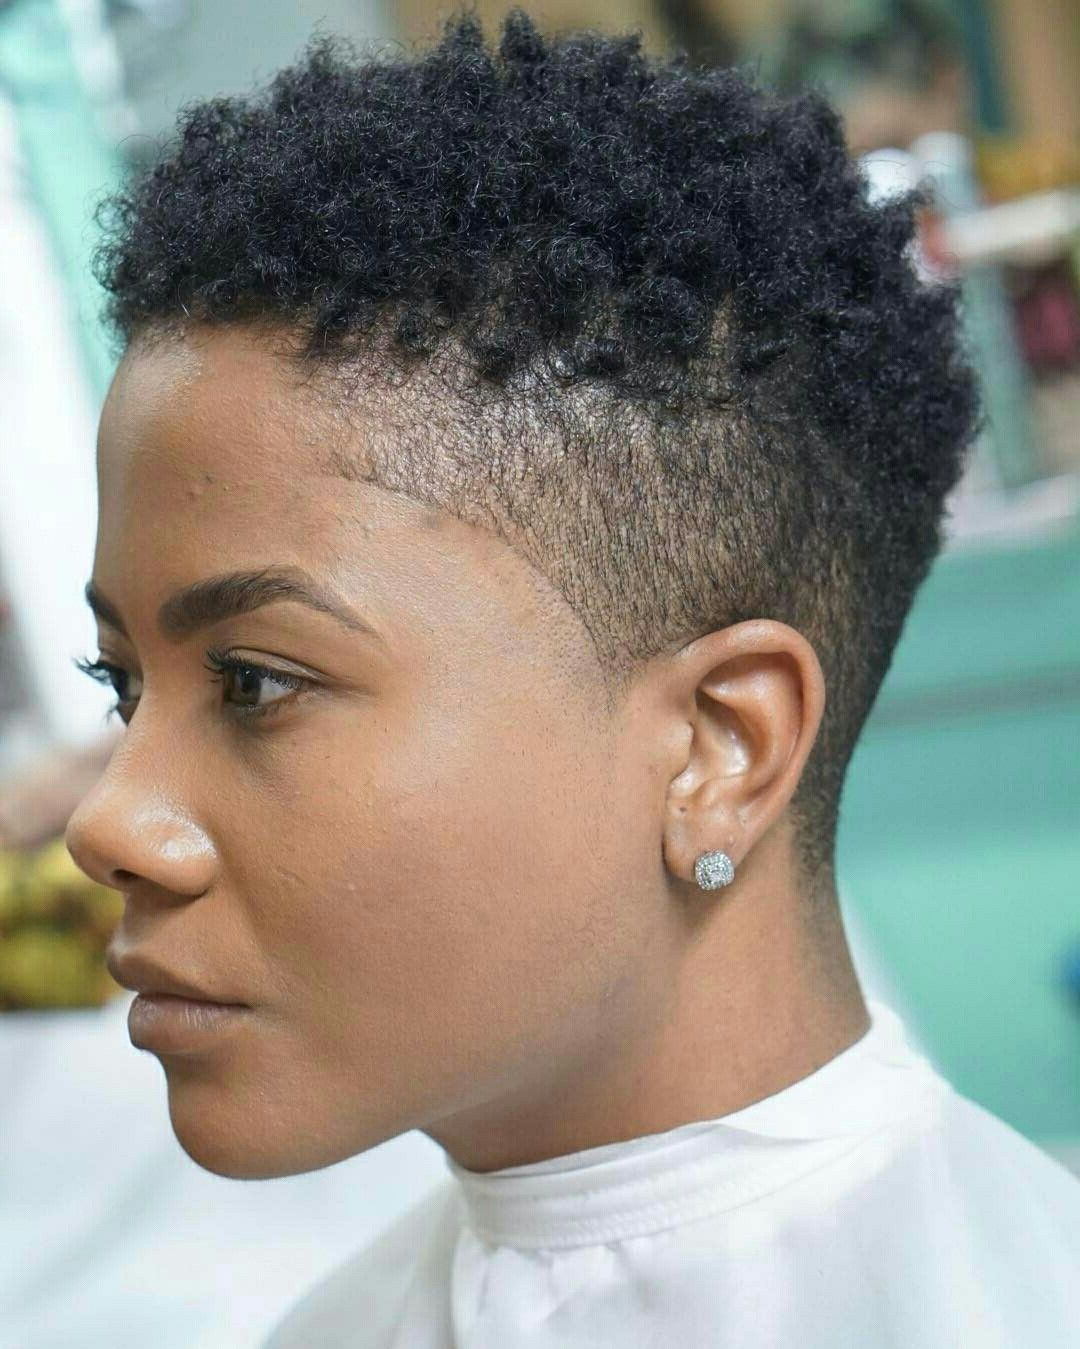 Perfect Natural Make Up | Short Hairstyles In 2018 | Pinterest For Black Women Natural Short Haircuts (Photo 3 of 25)